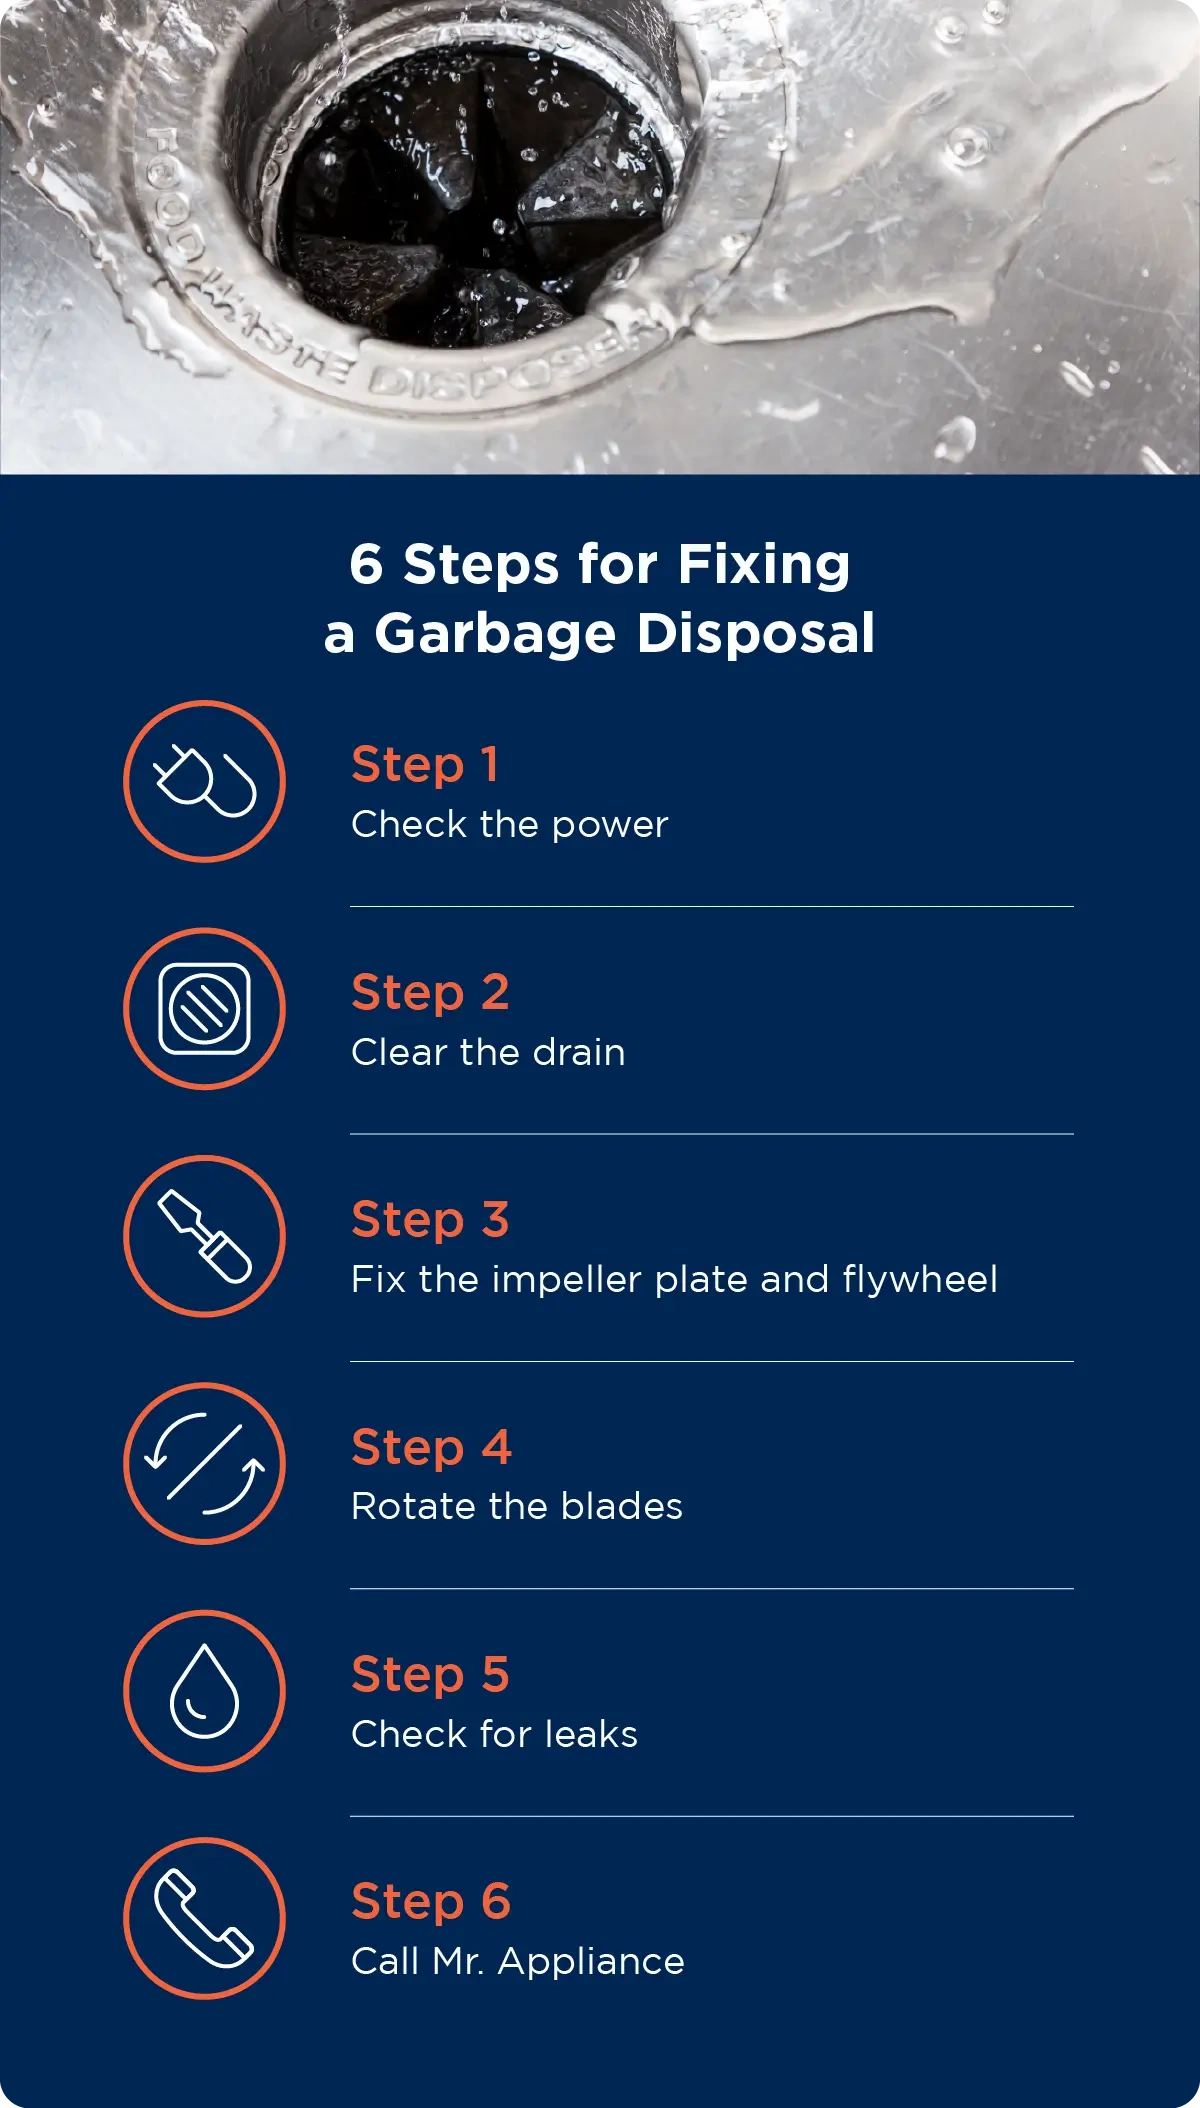 List of six steps for fixing a garbage disposal.